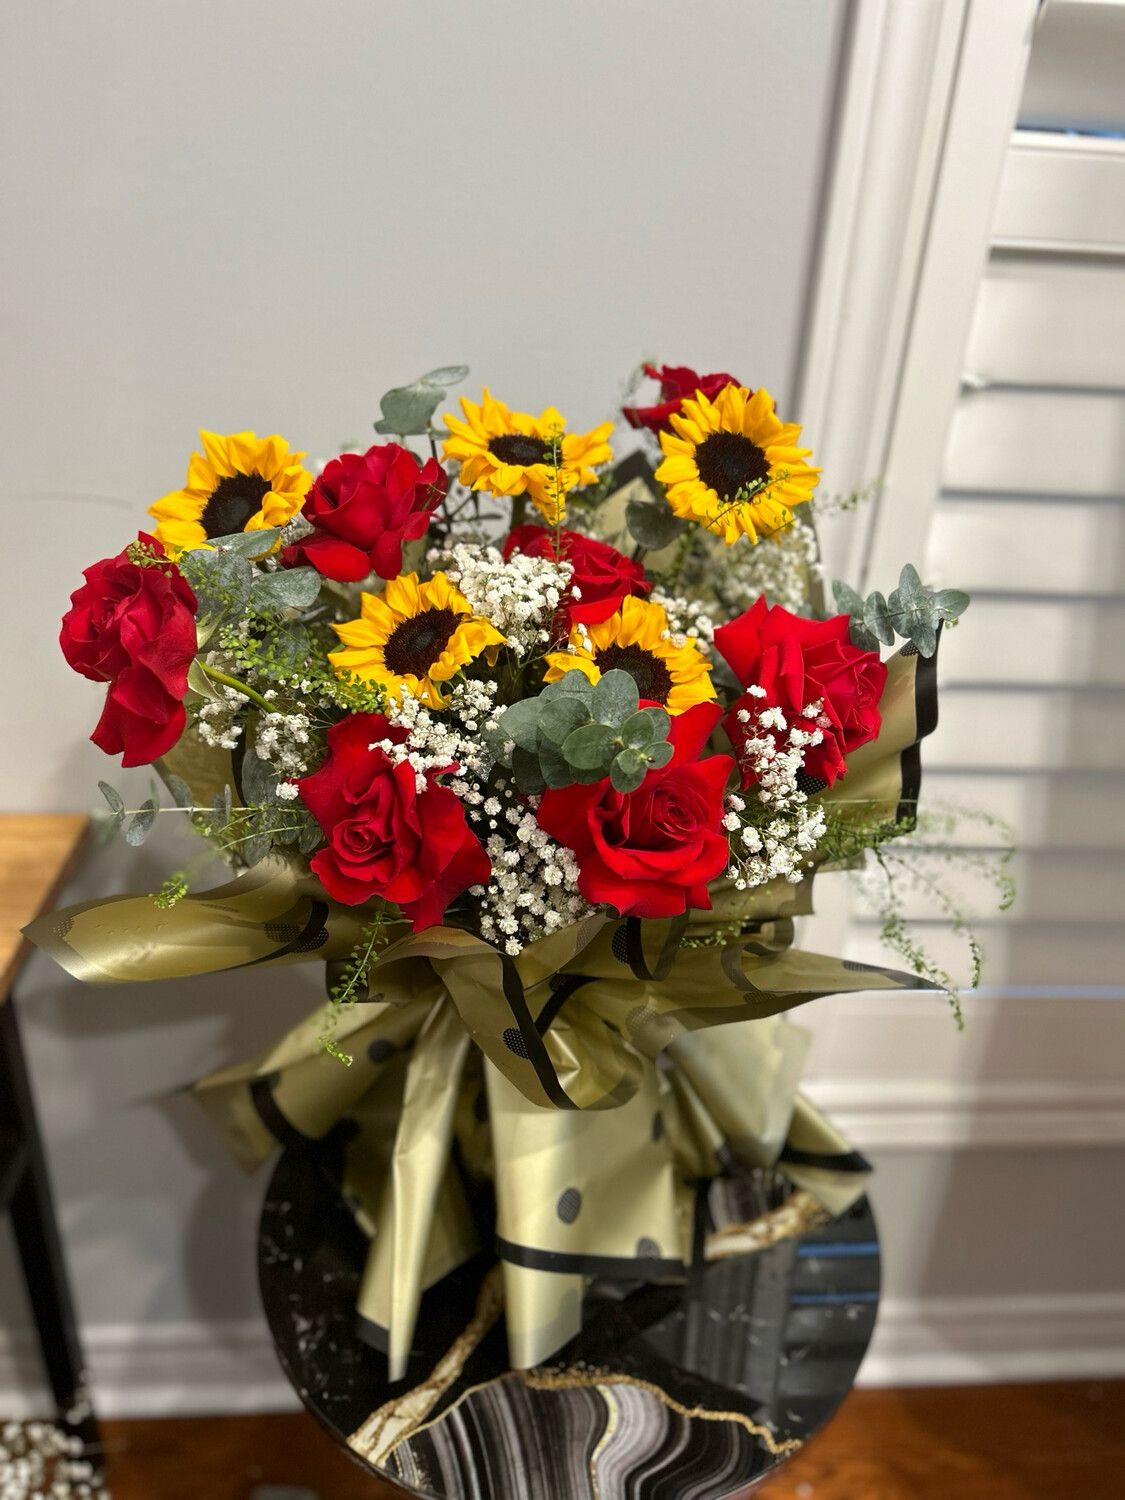 "Valentine's Day Bliss: Red Roses, Sunflowers, and More Bouquet"